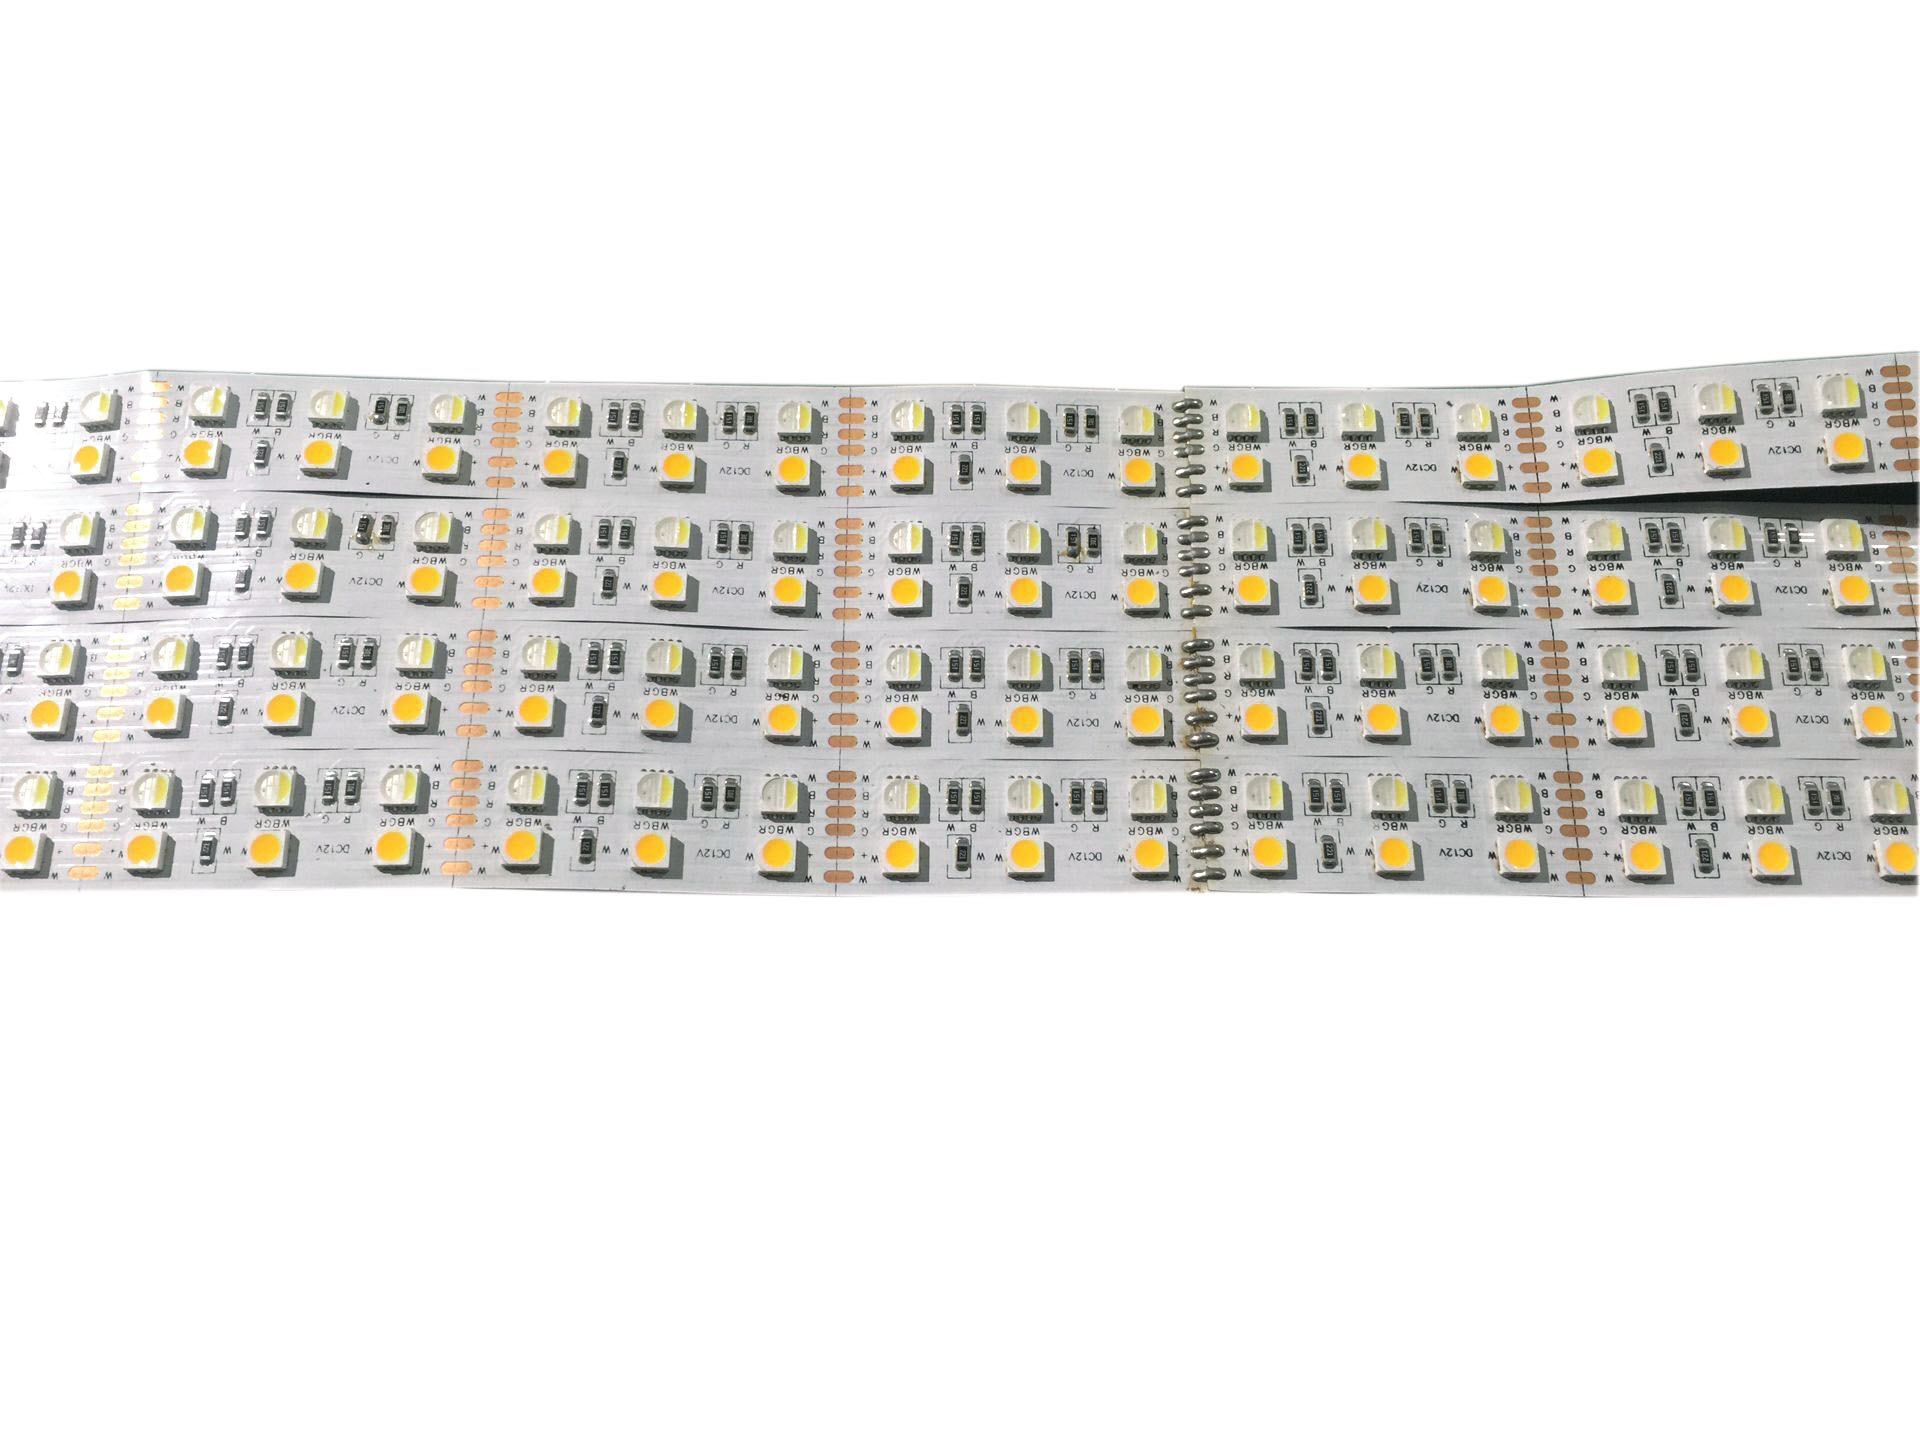 DC12V RGBW+CCT 600LEDs Dual Row LED Strips - 300 5050SMD RGBW + 300 5050SMD CCT Flexible LED Tape Lights, 5m/16.4ft Per Reel by Sale